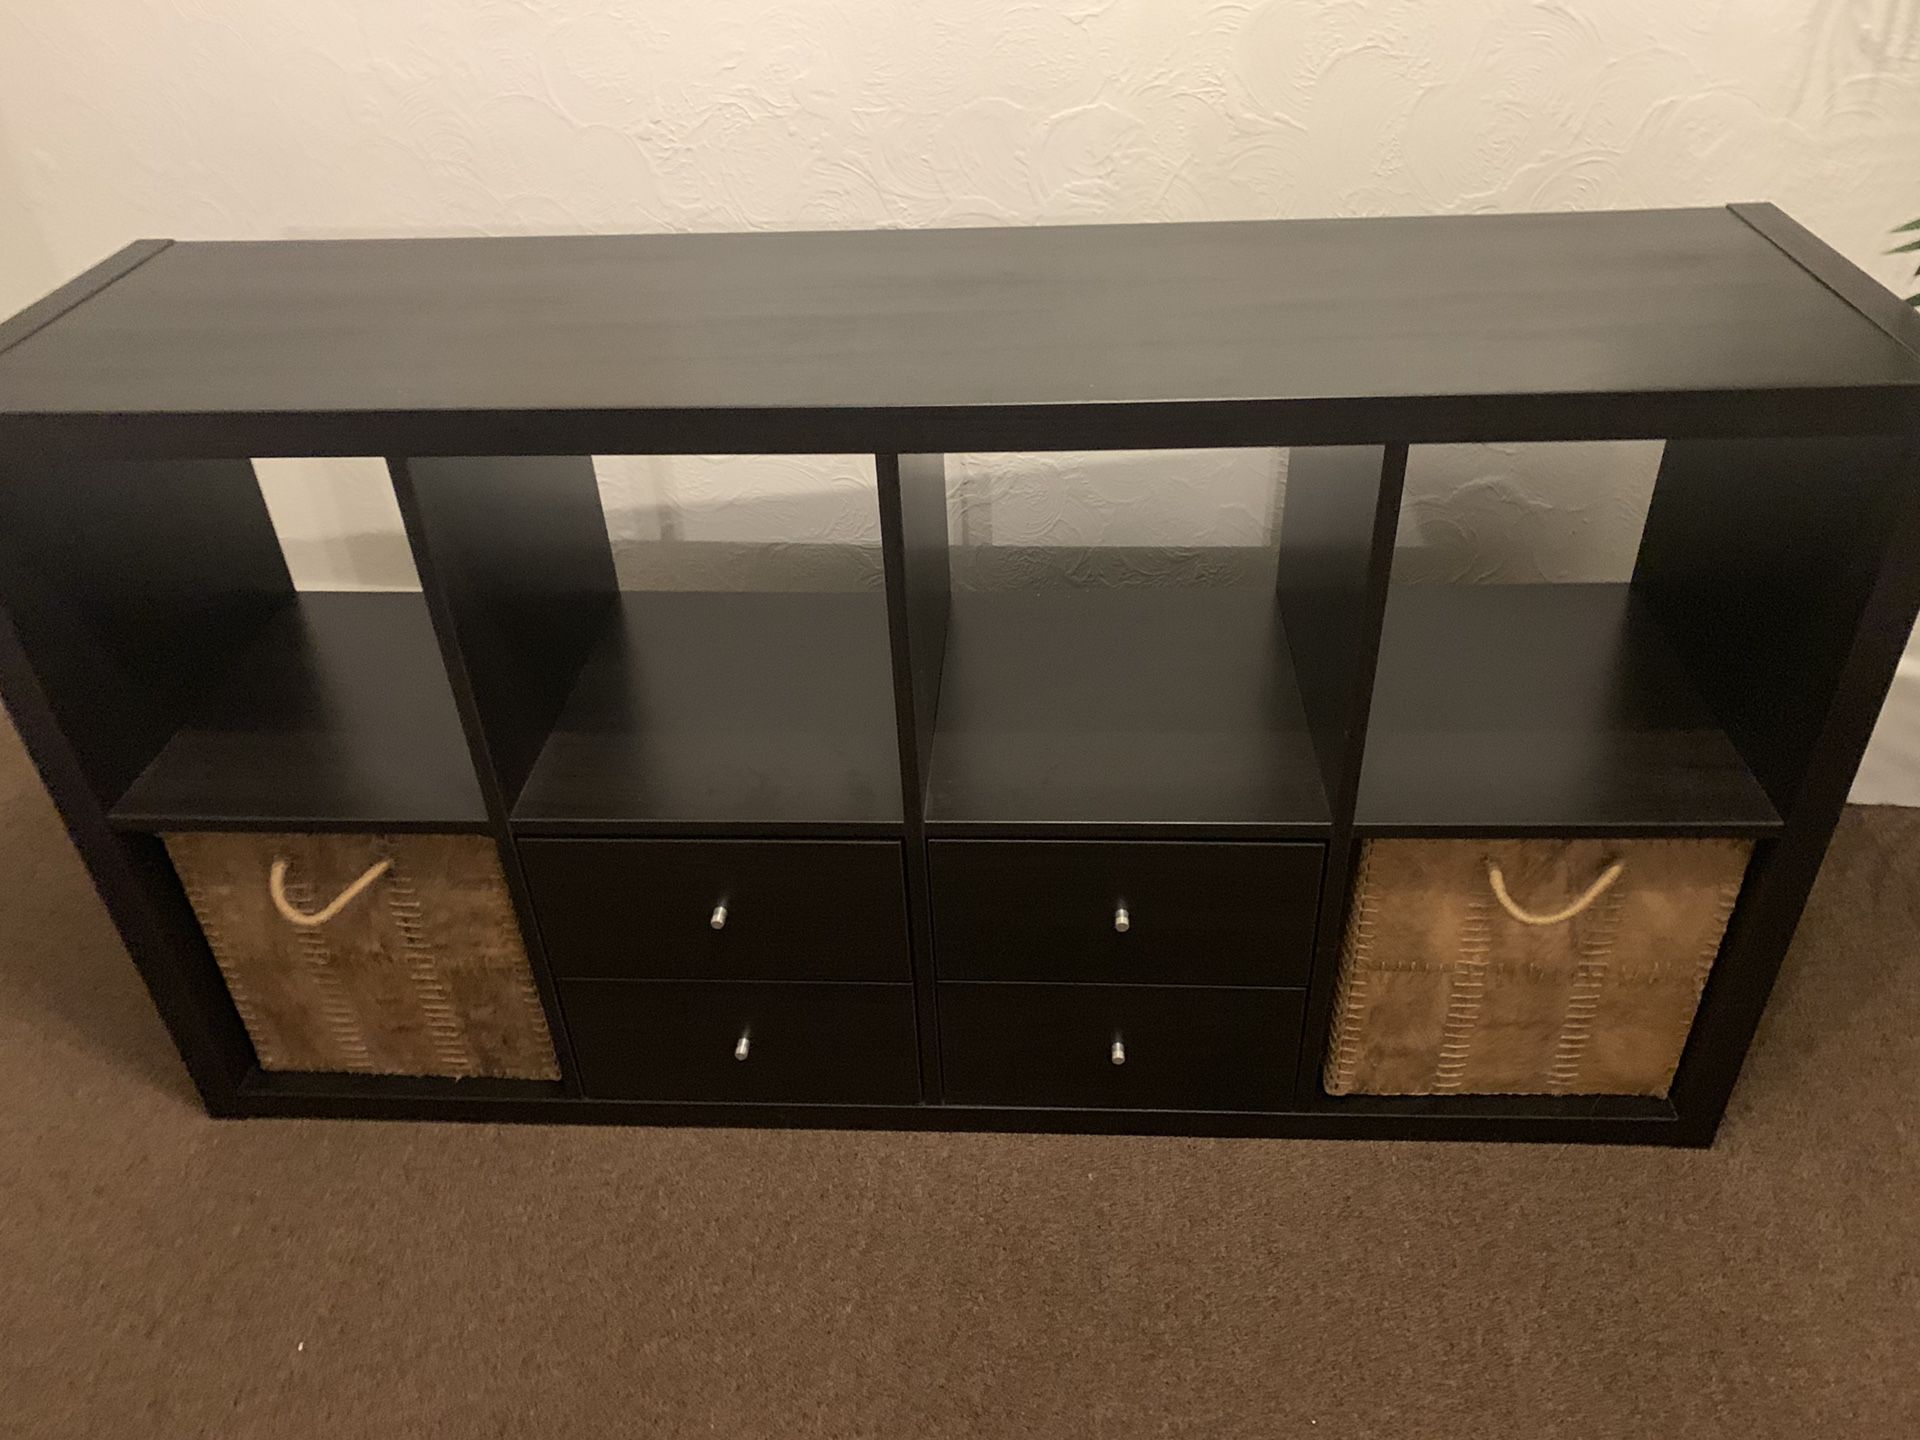 IKEA Dresser with four drawers and two baskets